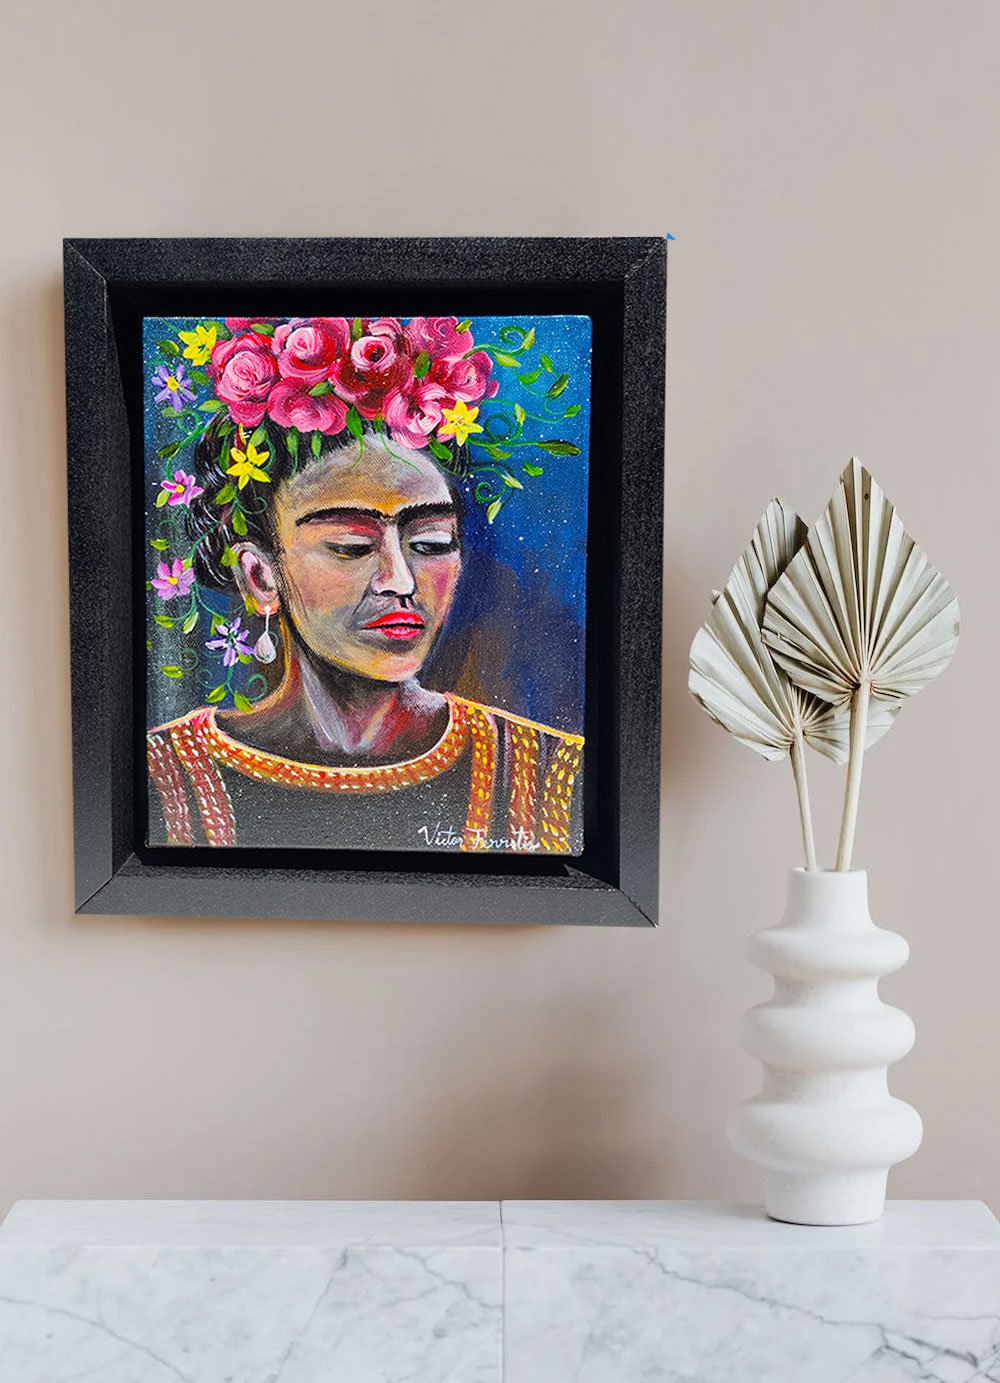 Semi-Abstract depiction of the eminent Mexican artist, Frida Kahlo. Acrylic on gallery canvas. Size: 8x10x1.5 inches. The work of art has a custom frame handmade with completely resistant, strong poplar wood and is already painted with a uniform black color. The frame already has some D-shaped hooks assembled, ready to hang in your beautiful home.